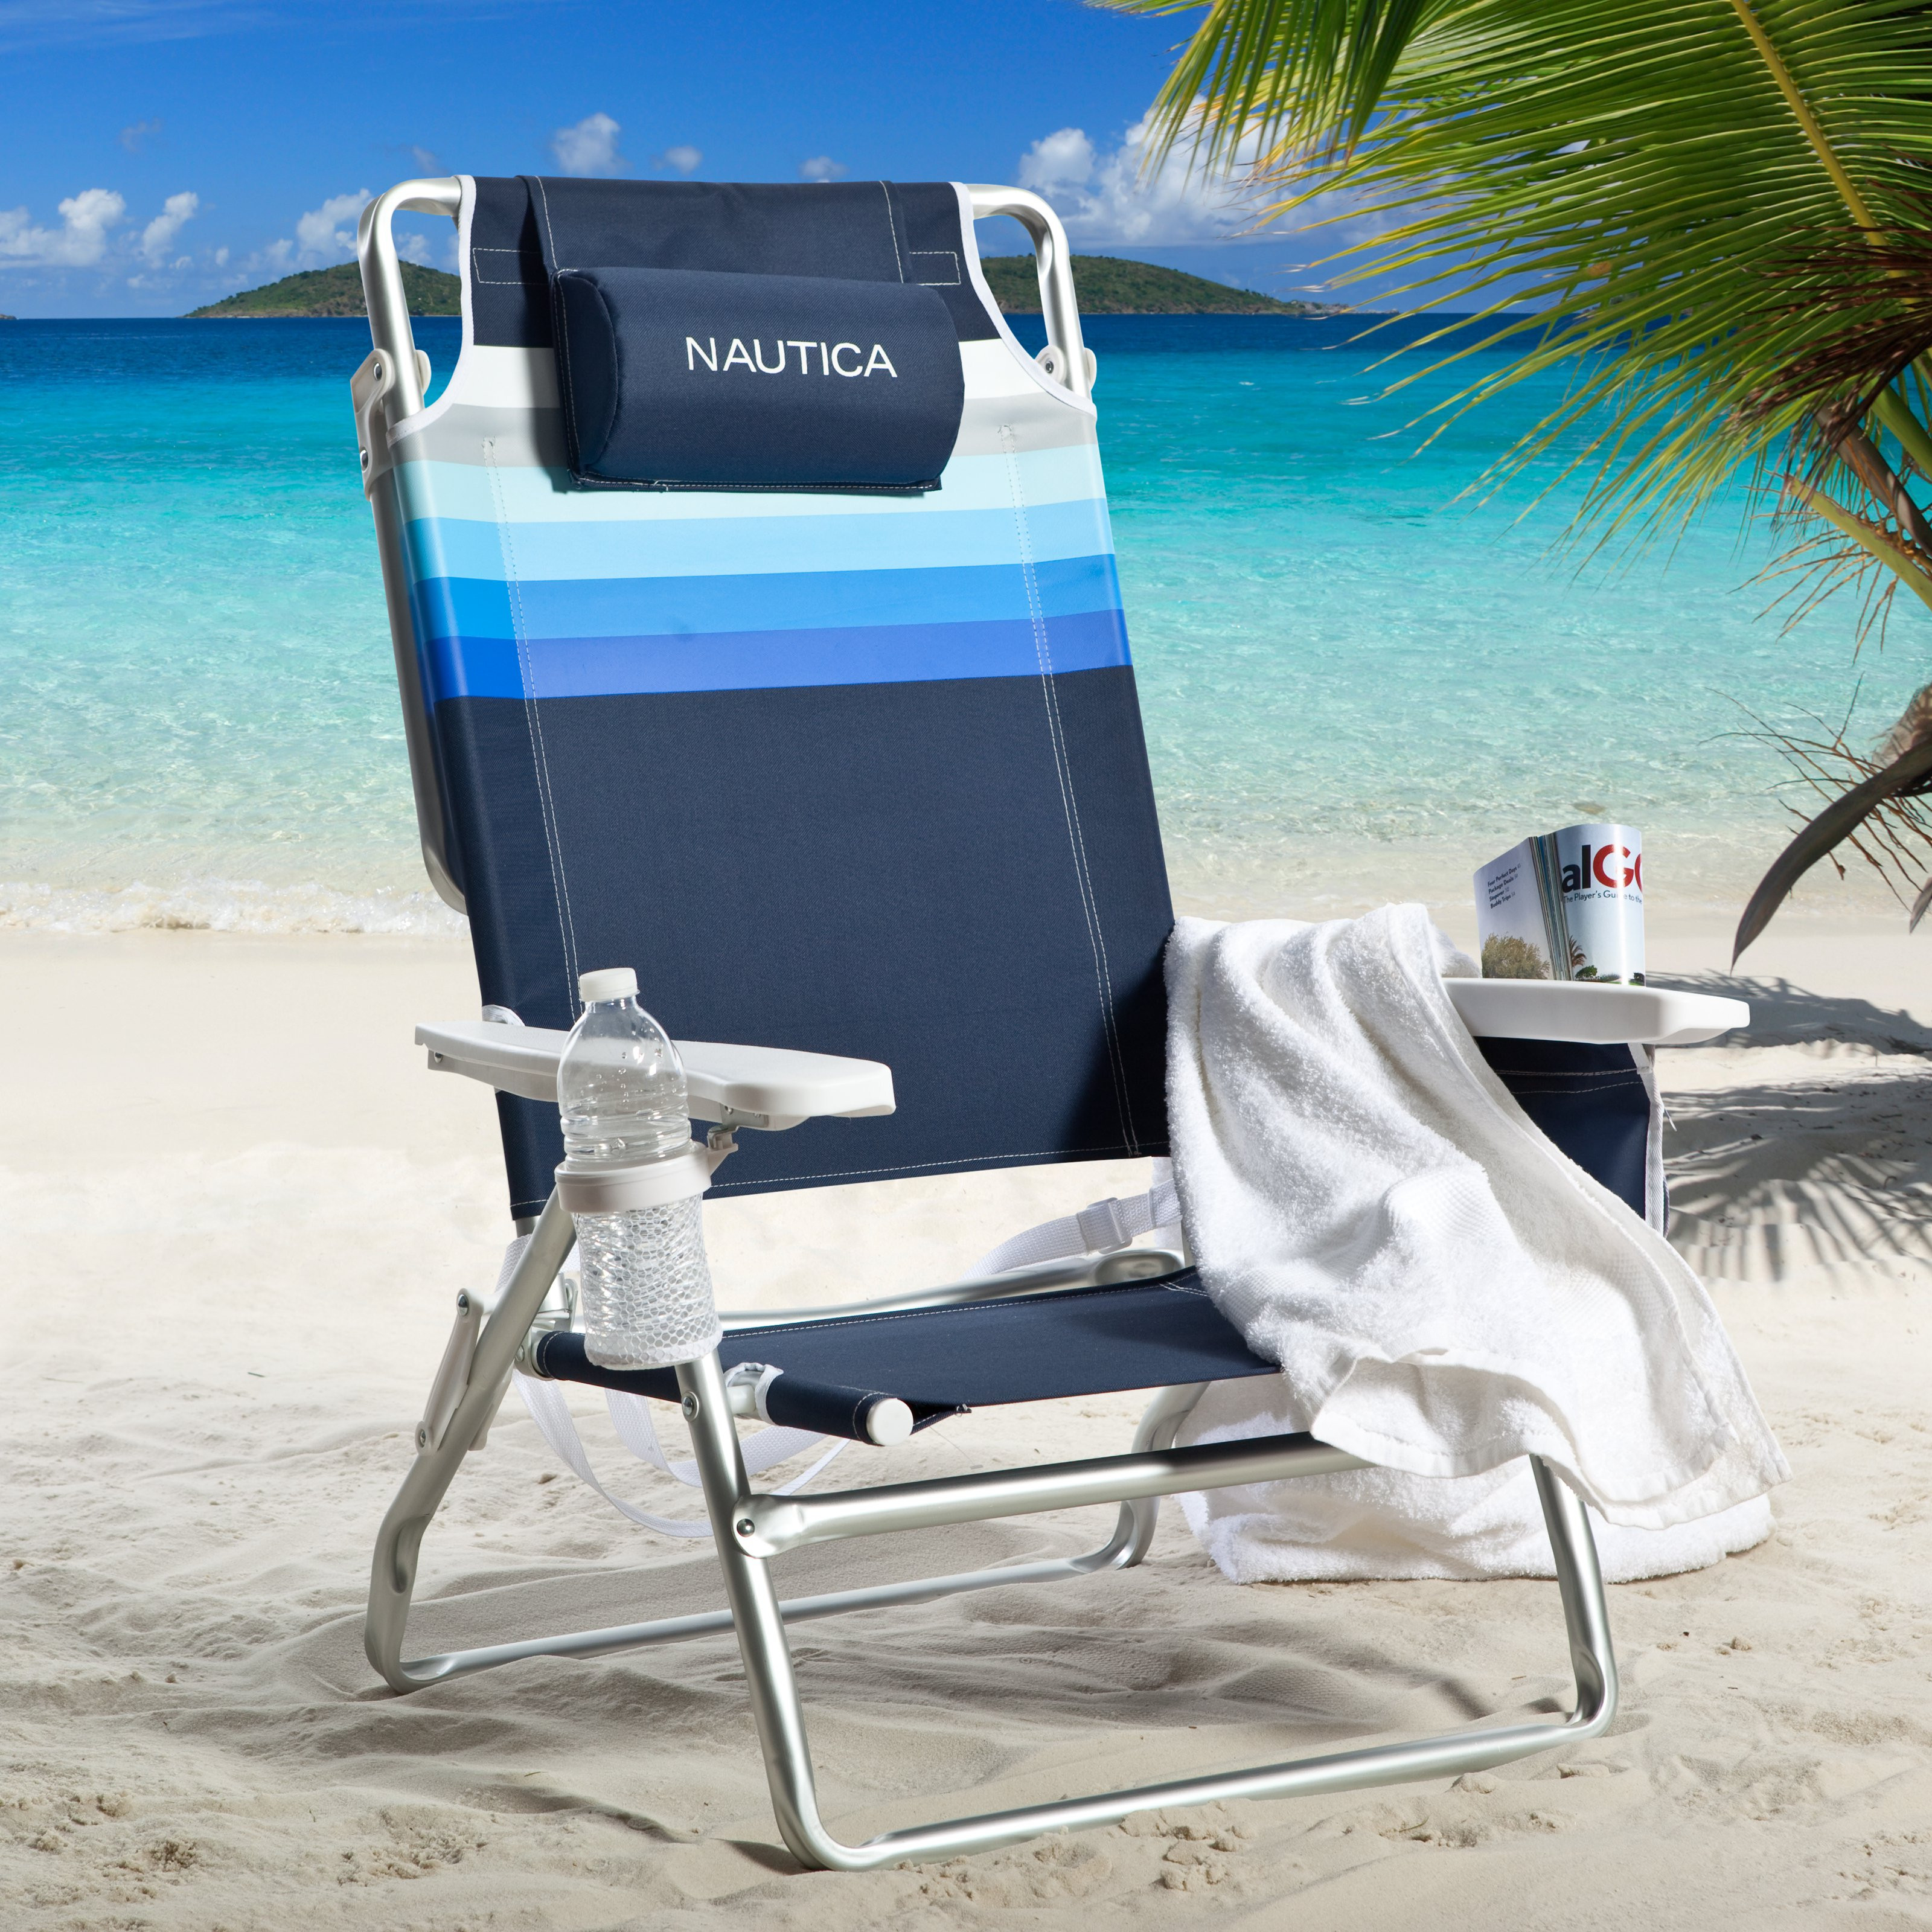 20 Best Nautica Beach Chair - Best Collections Ever | Home Decor | DIY